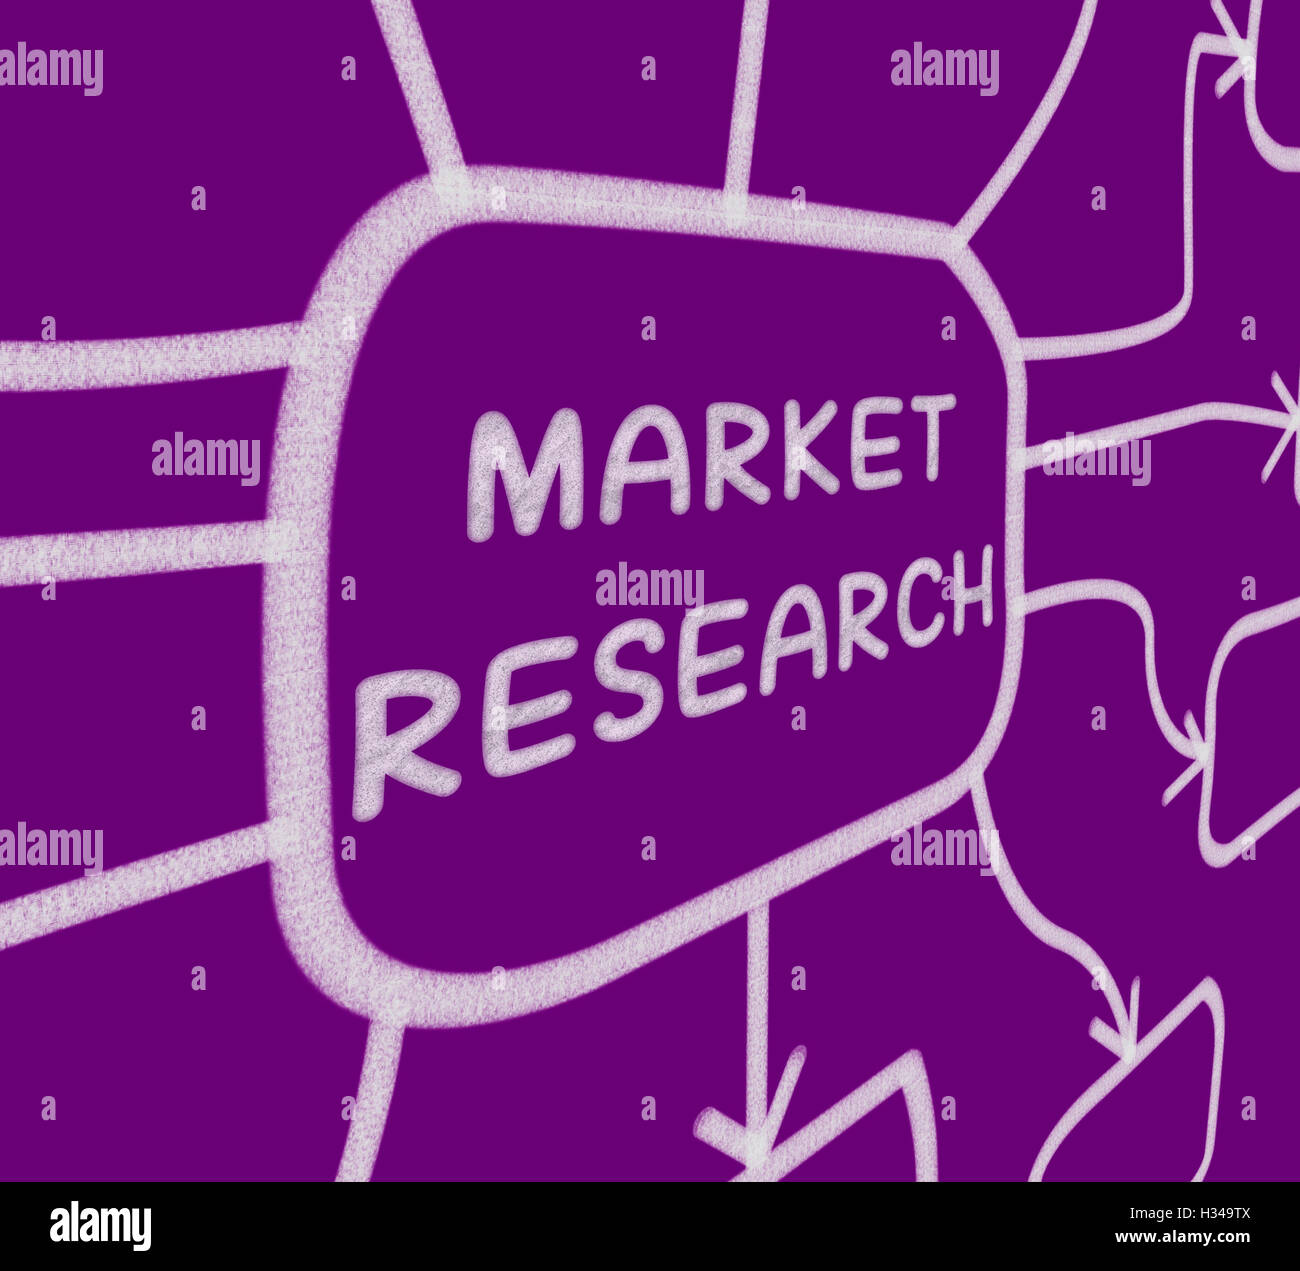 Market Research Diagram Shows Researching Consumer Demand And Pr Stock Photo